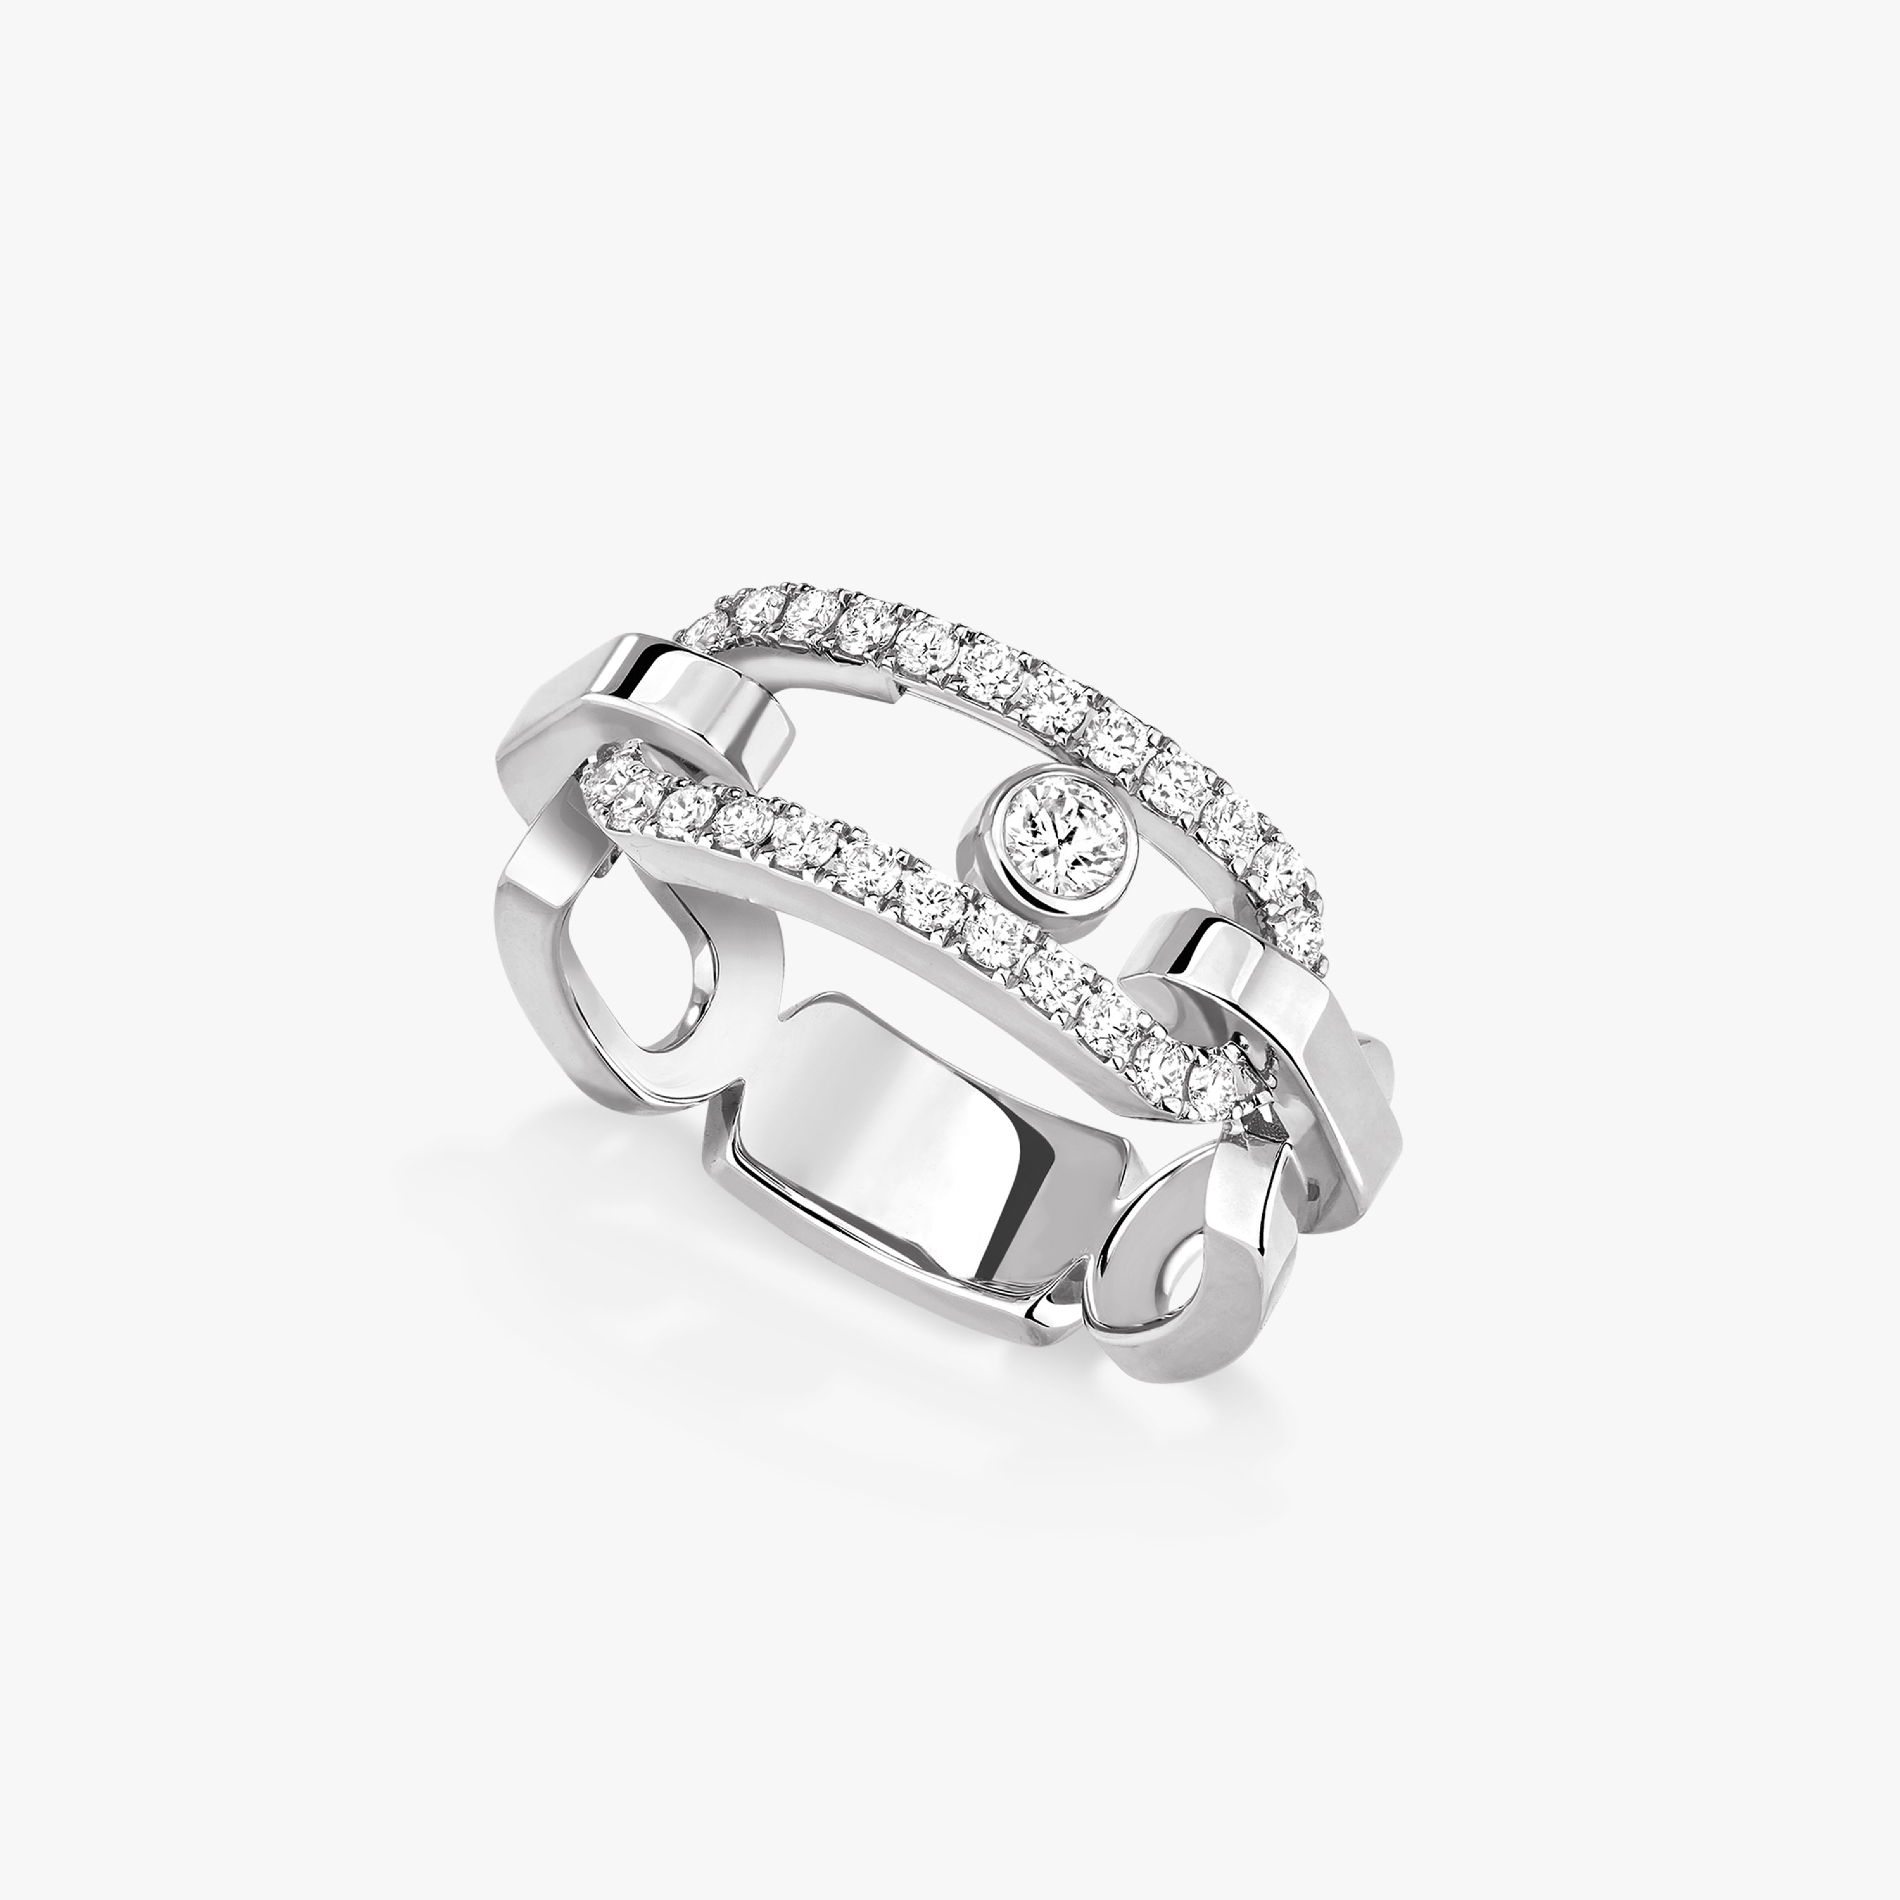 Ring For Her White Gold Diamond Move Link 12728-WG